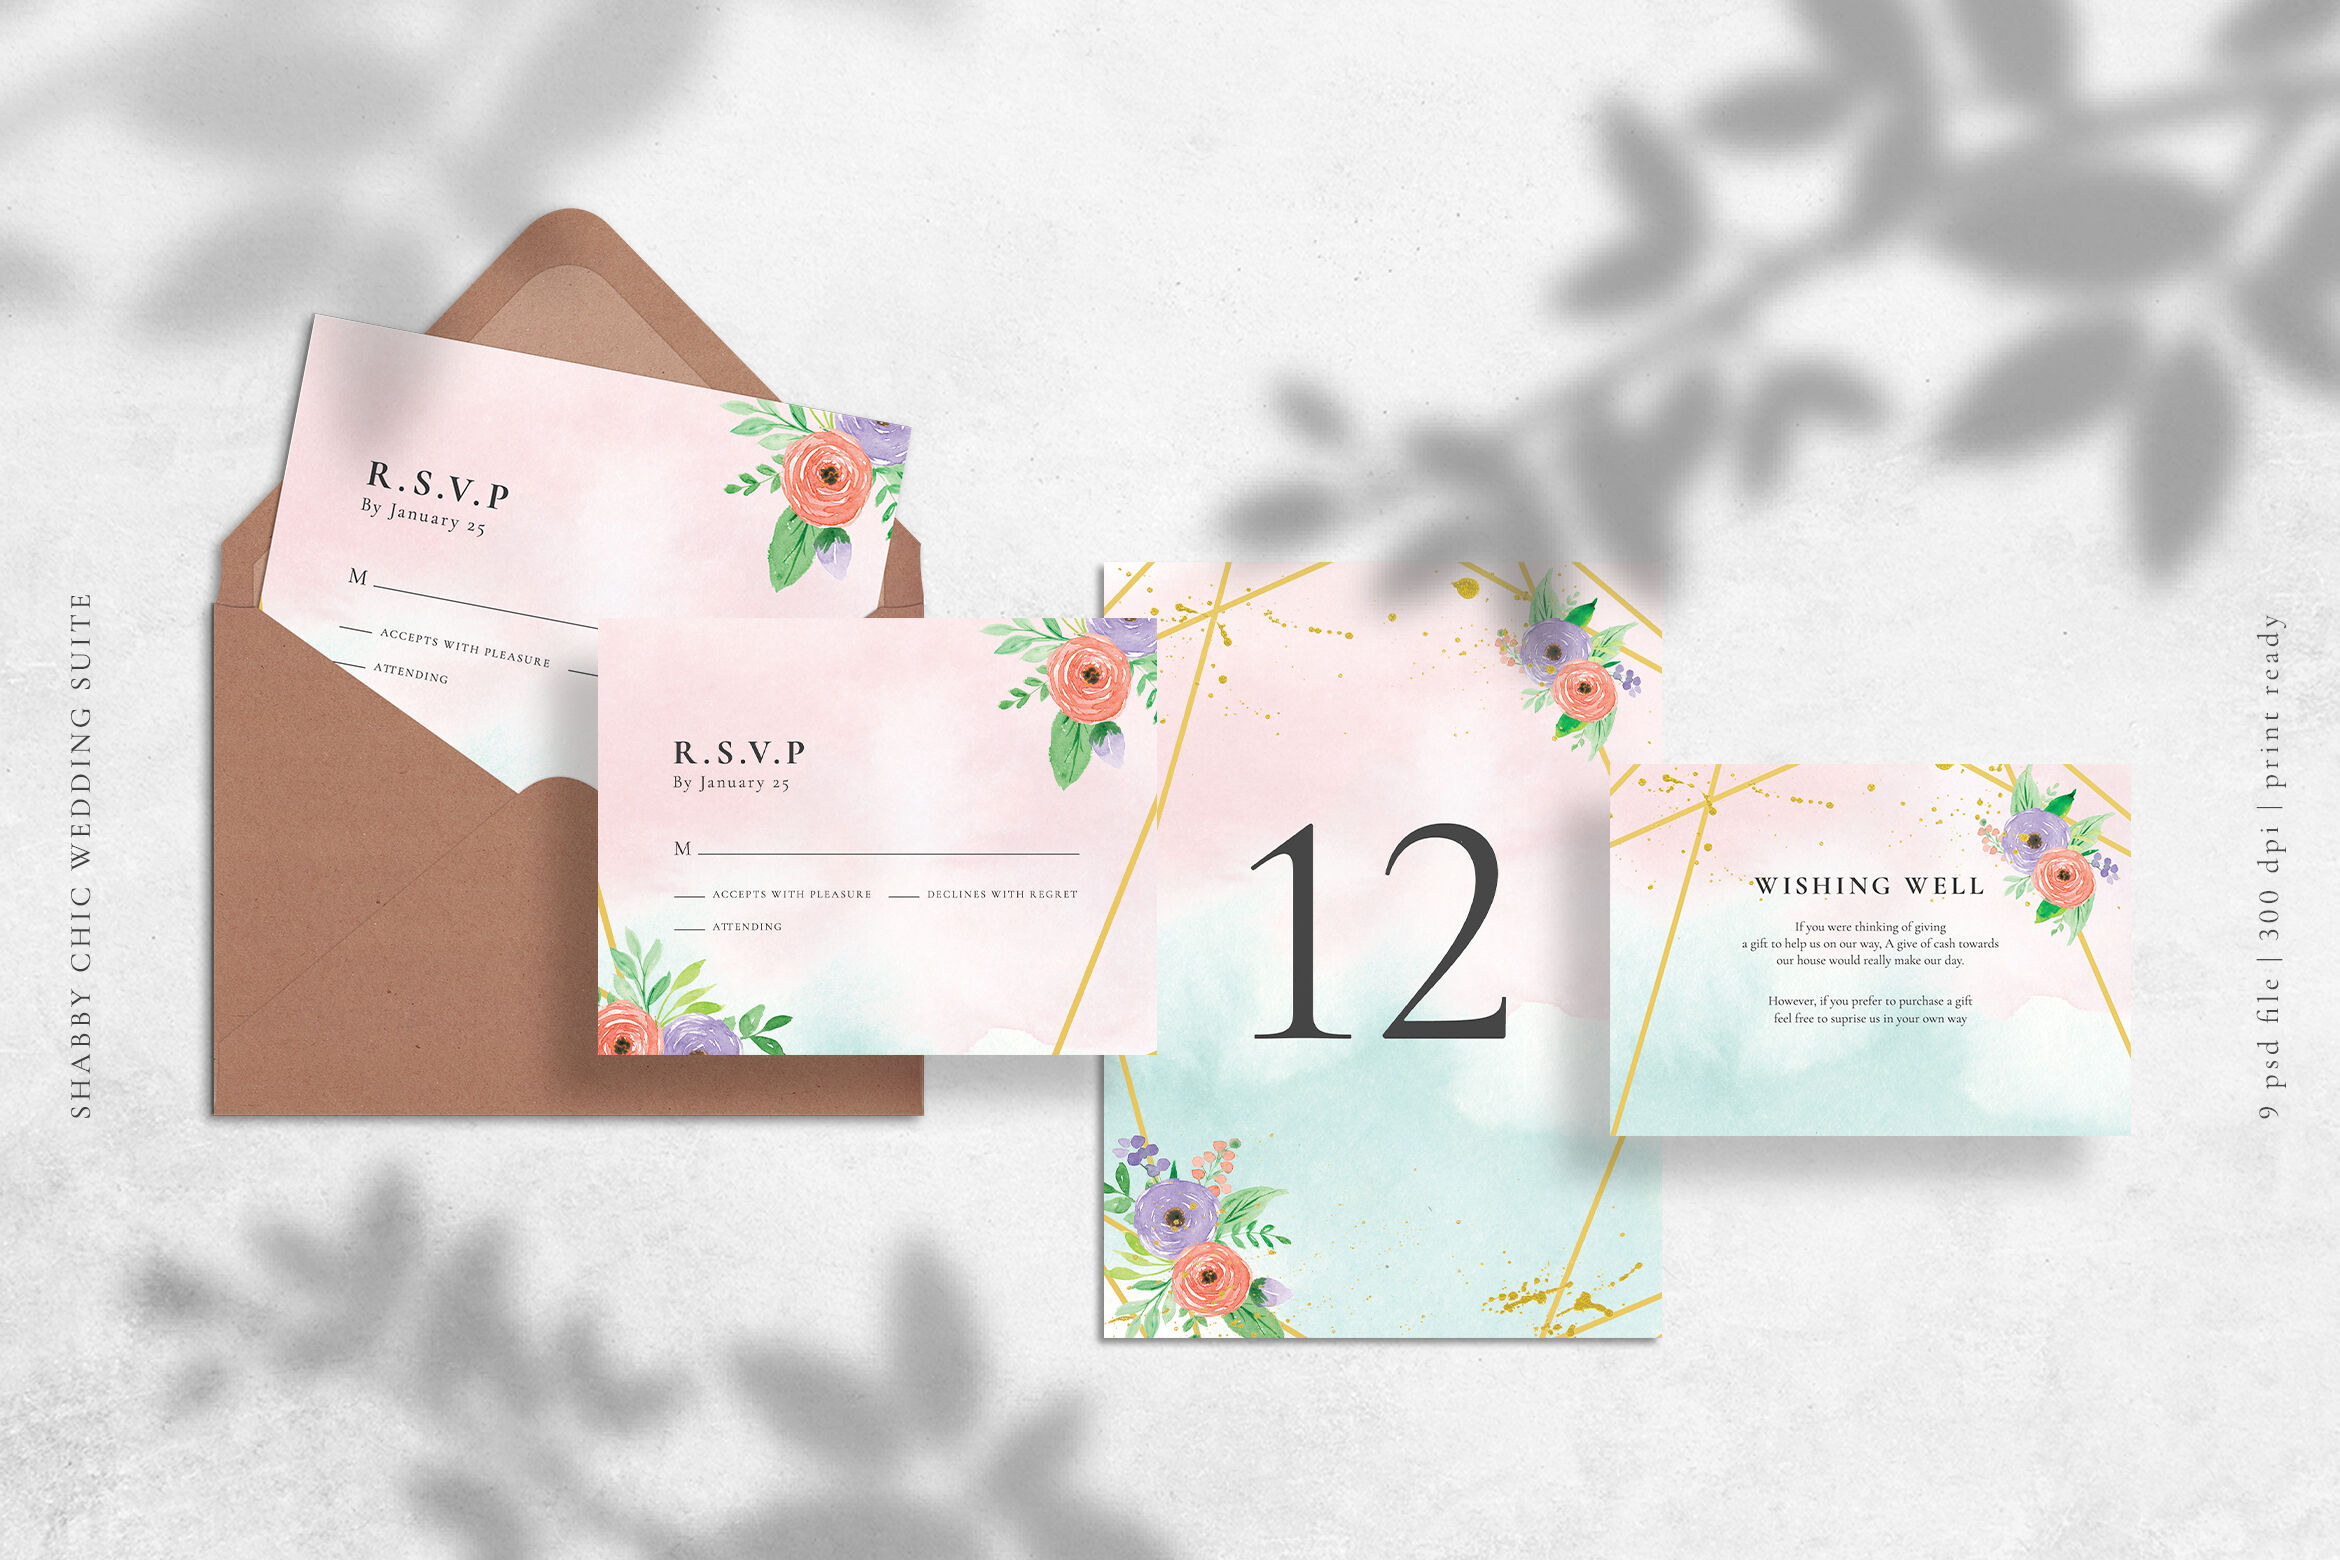 Download Save The Date Mockup Psd Free - Free Mockups | PSD ...